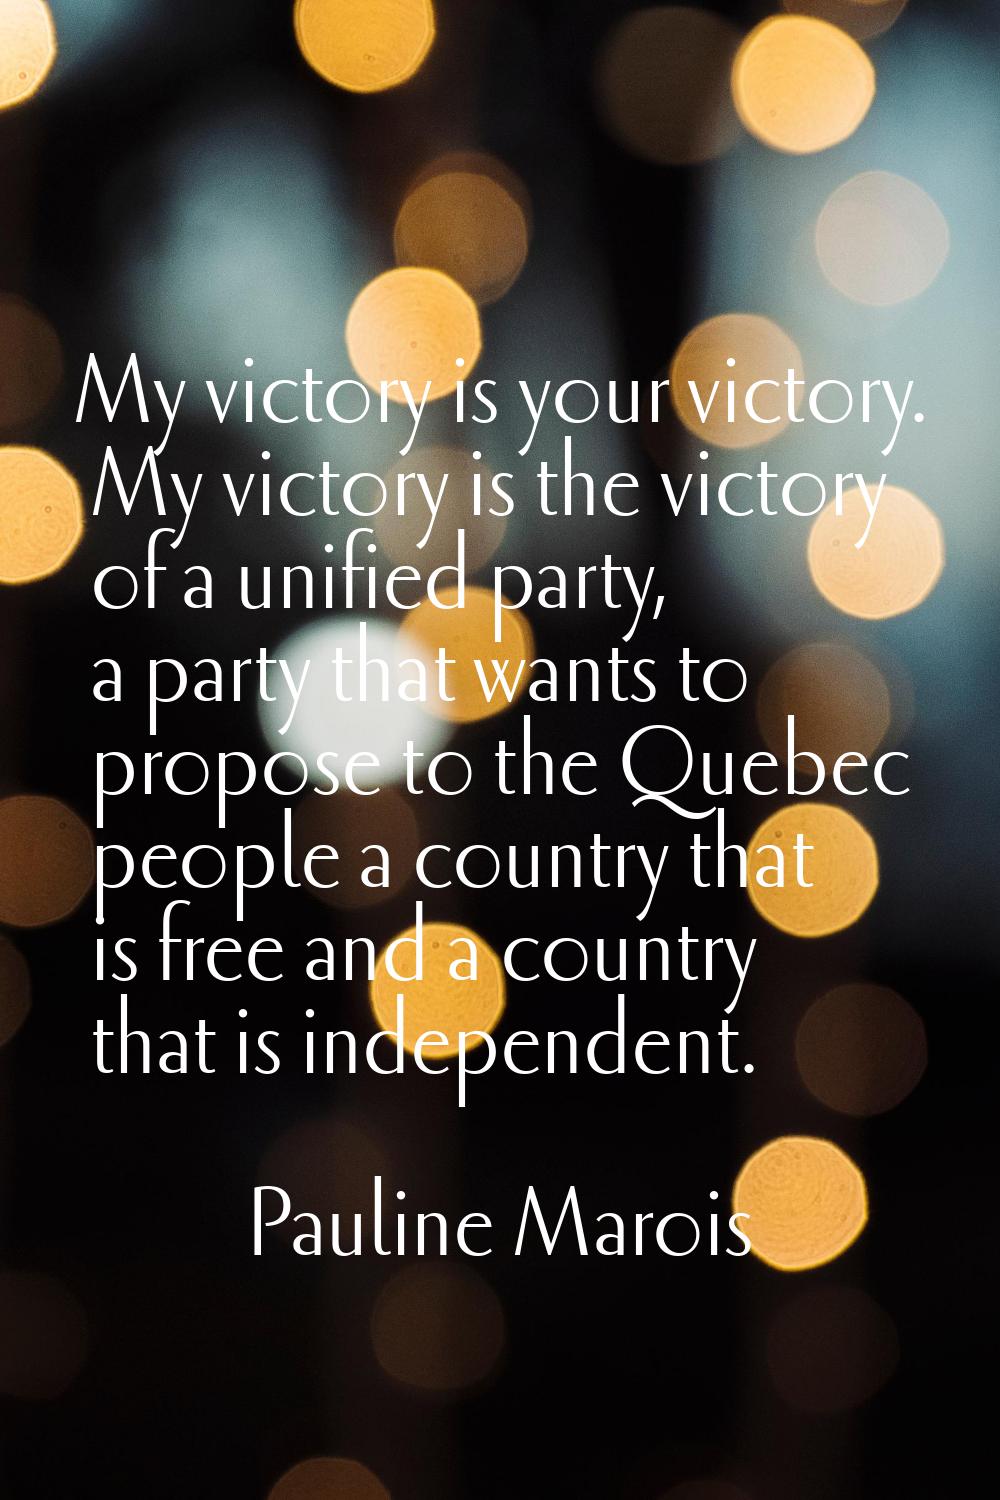 My victory is your victory. My victory is the victory of a unified party, a party that wants to pro